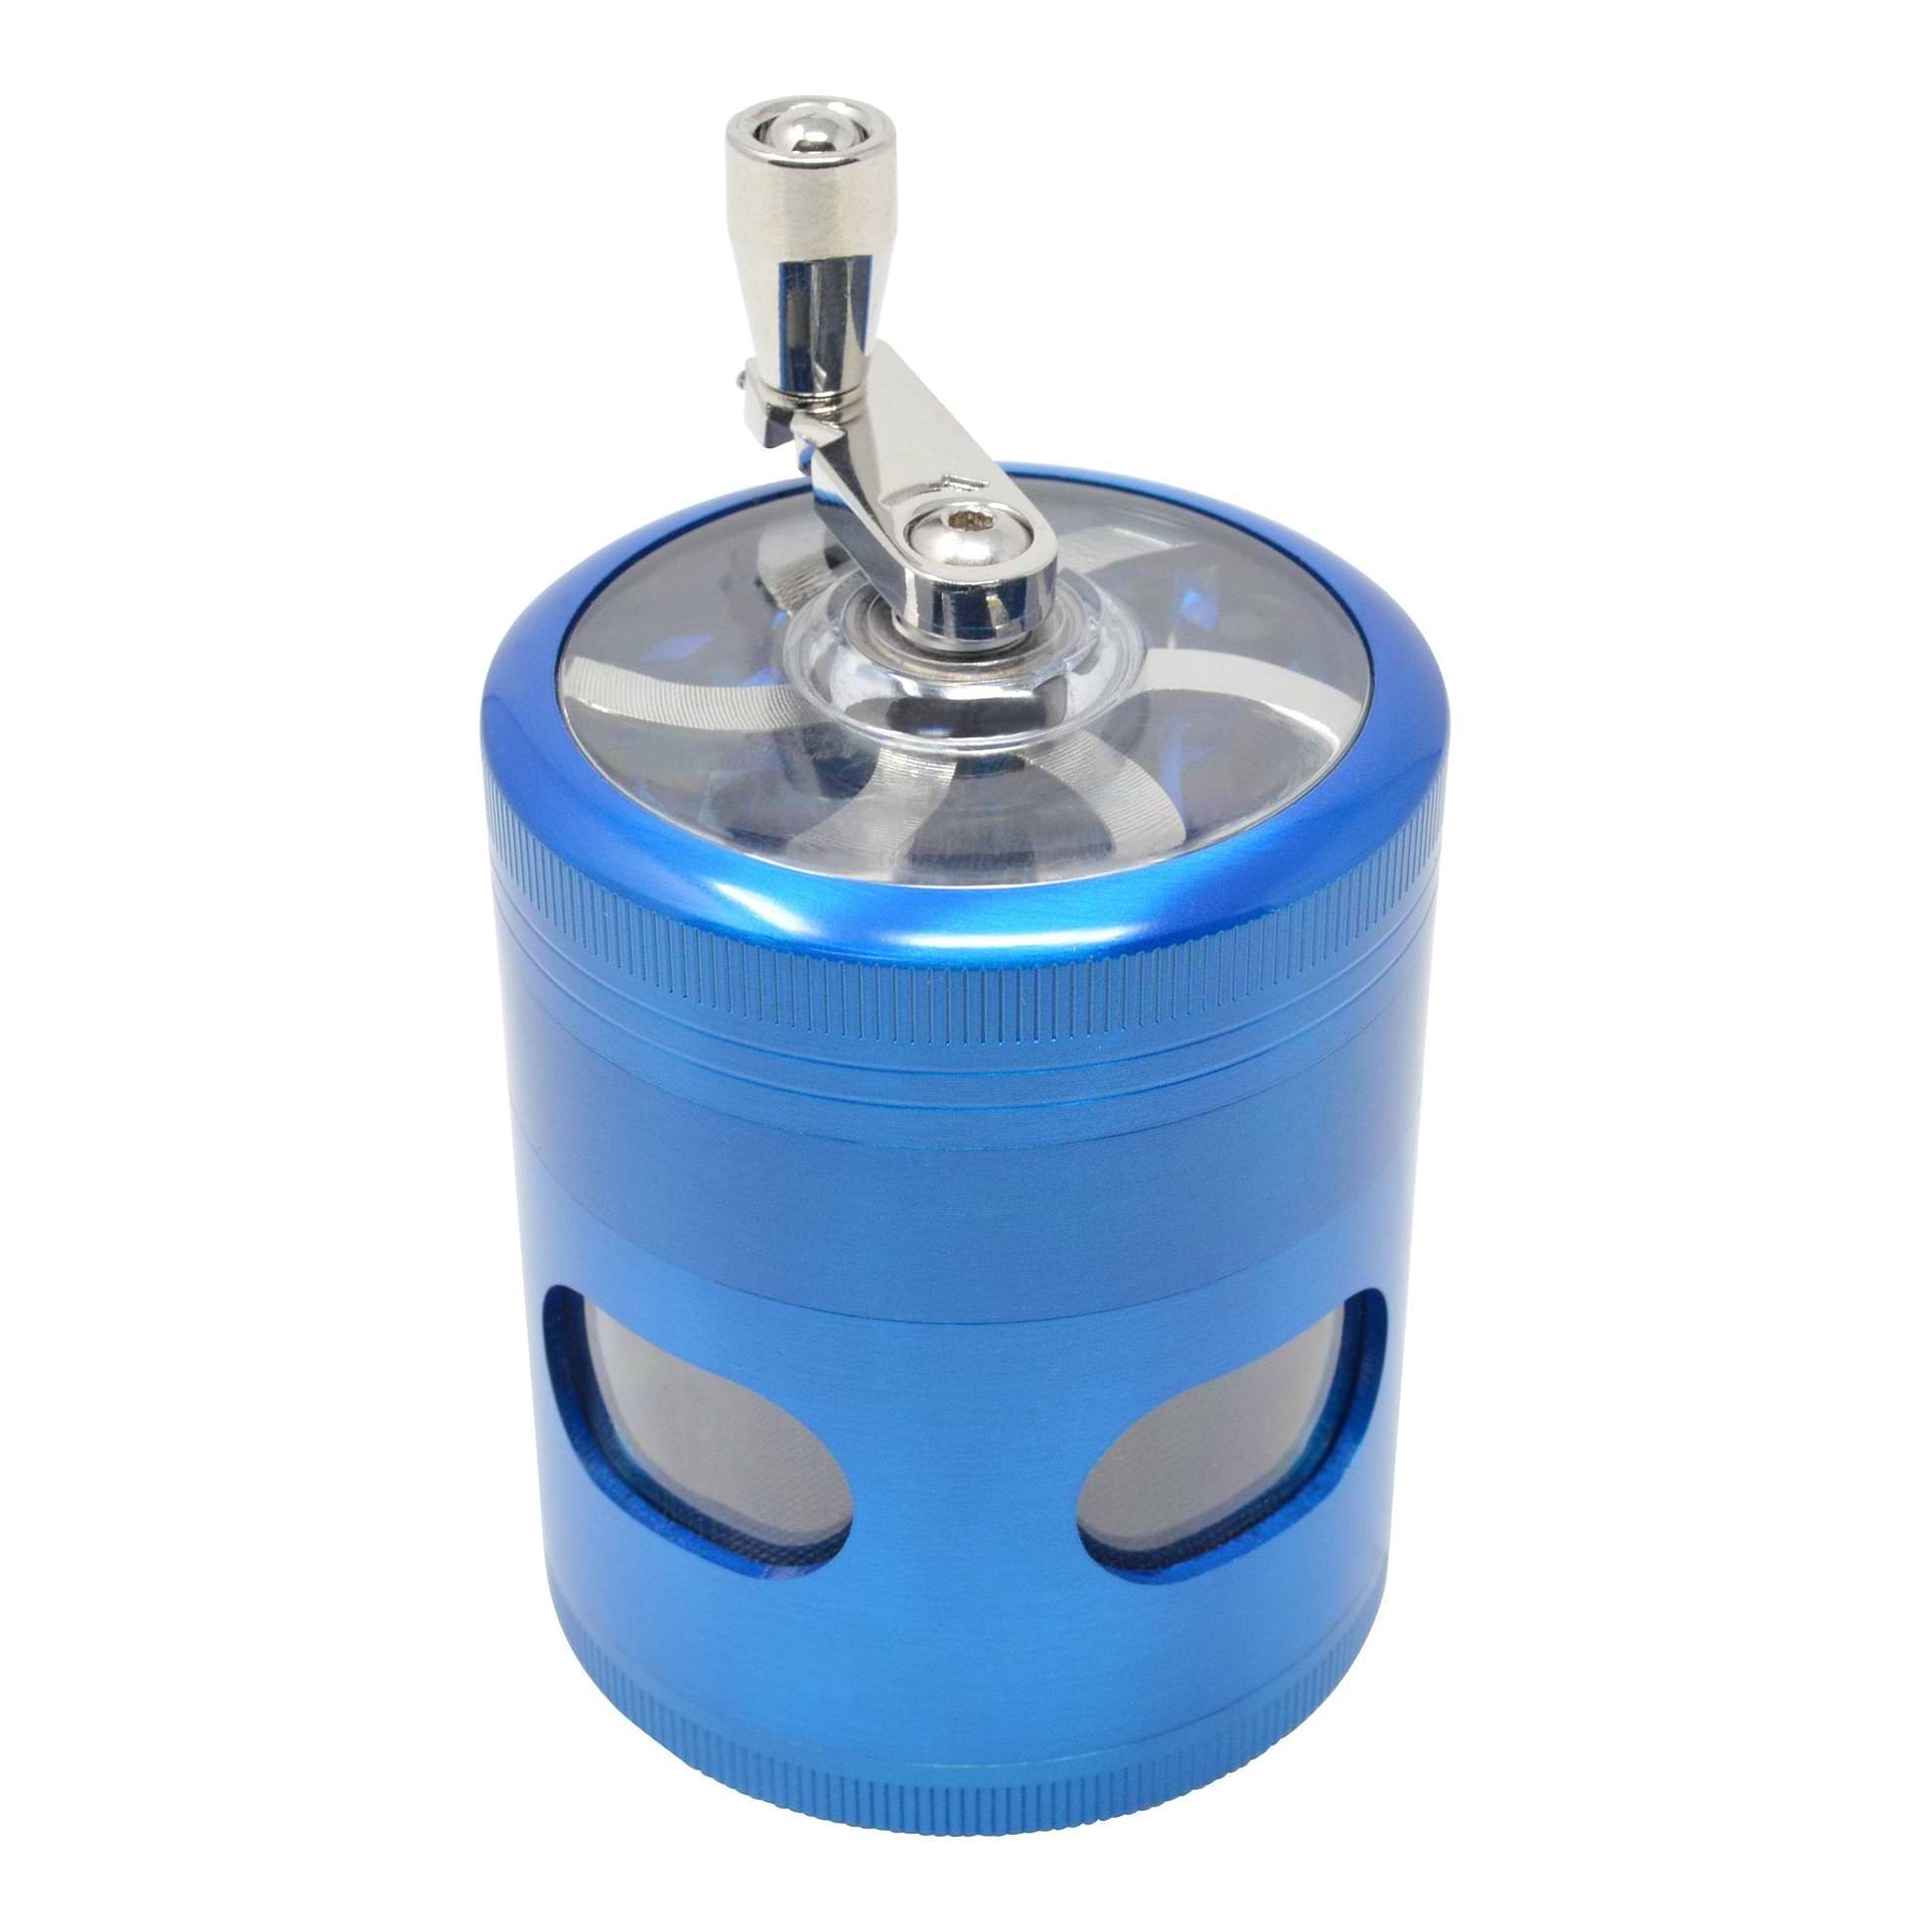 High angle shot of shiny blue 56mm dubs grinder smoking accessory with hand crank mechanical sharpener look